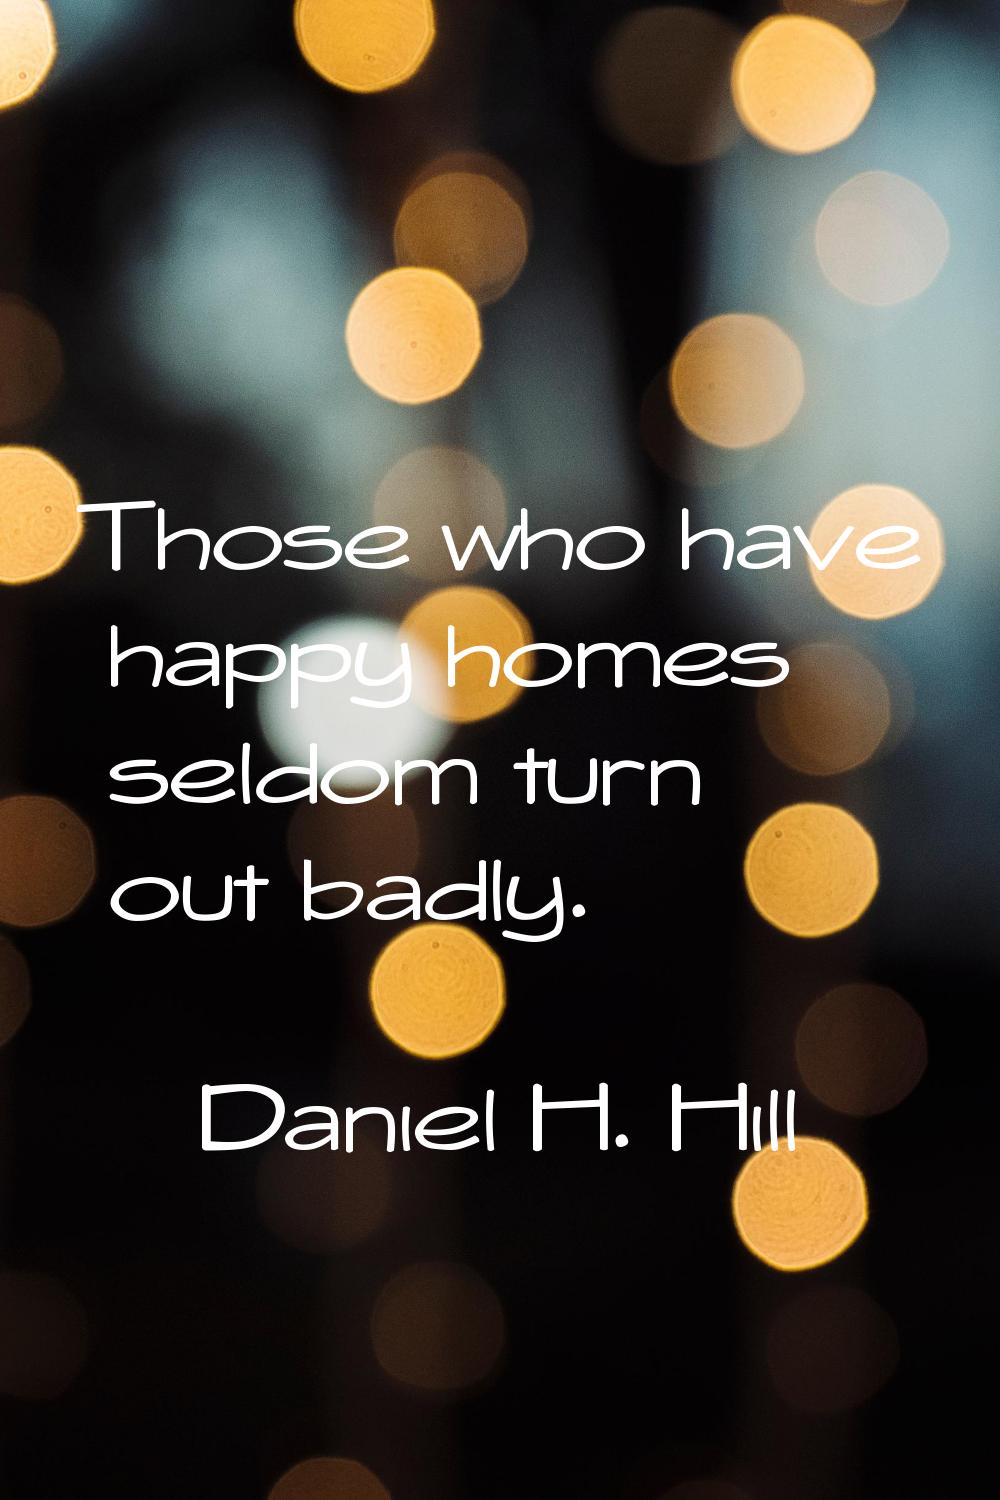 Those who have happy homes seldom turn out badly.